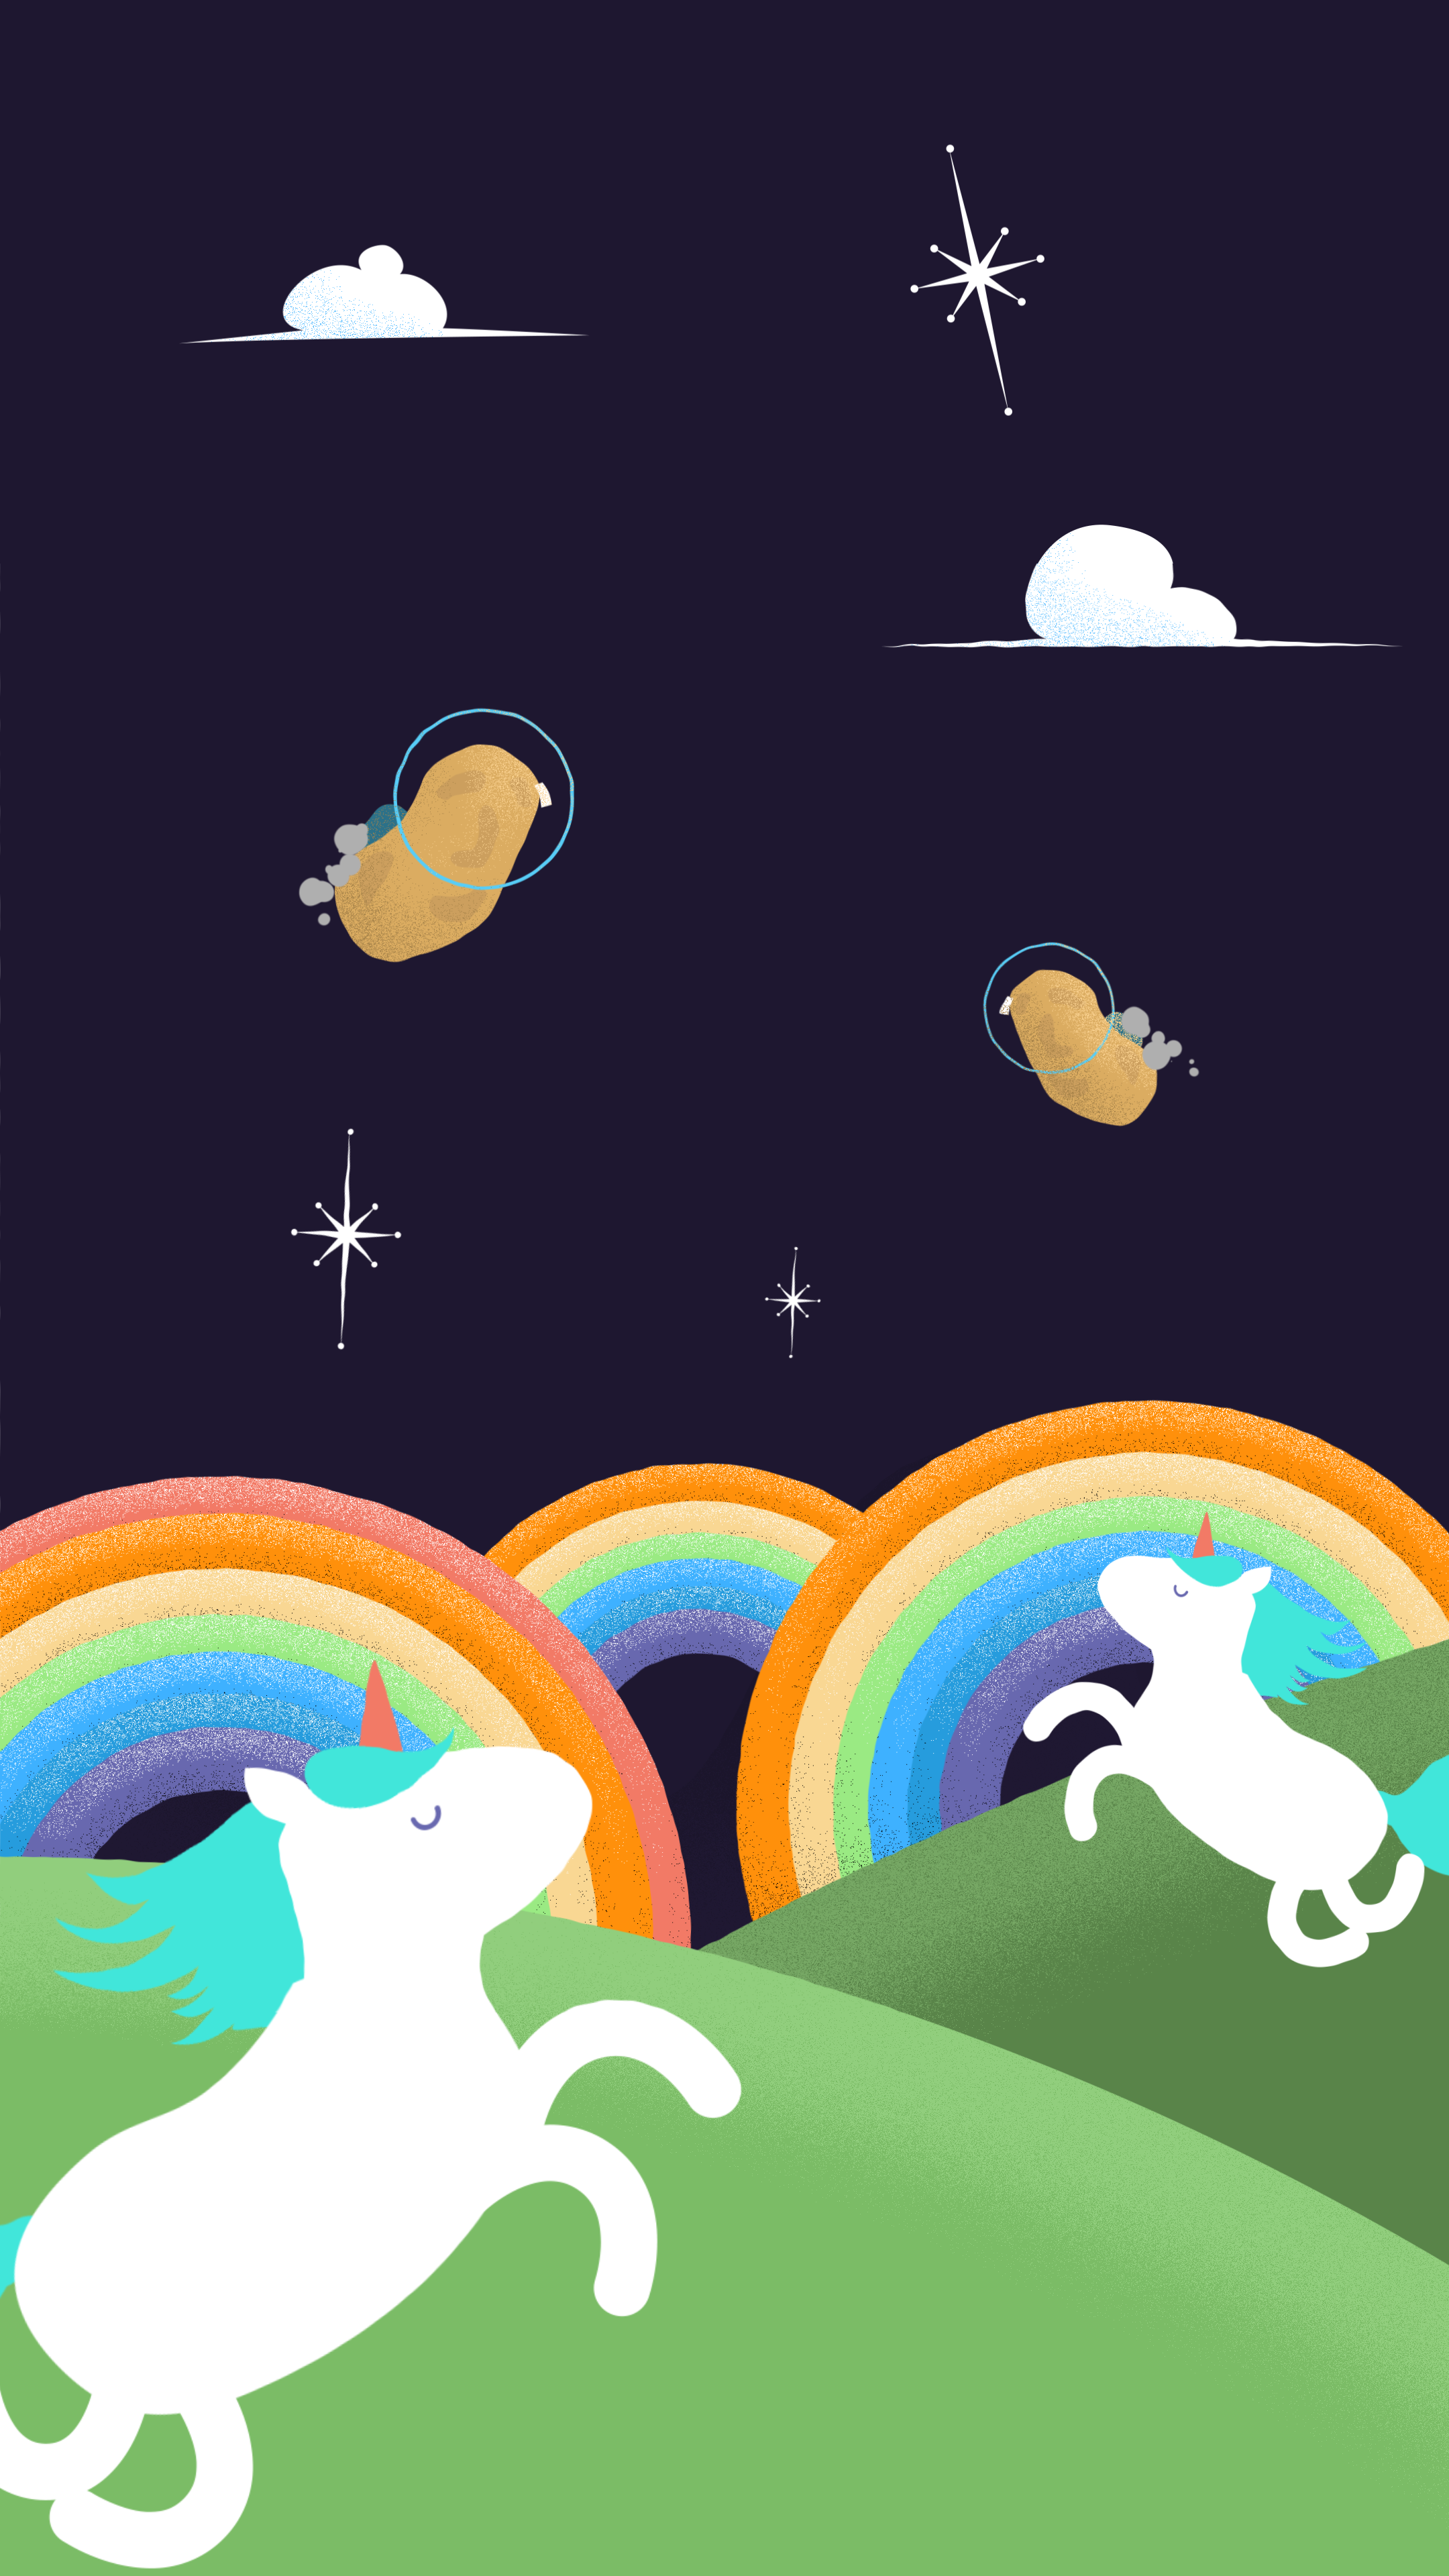 Vertical image showing a cartoon landscape with unicorns and rainbows with space potatoes flying overhead.